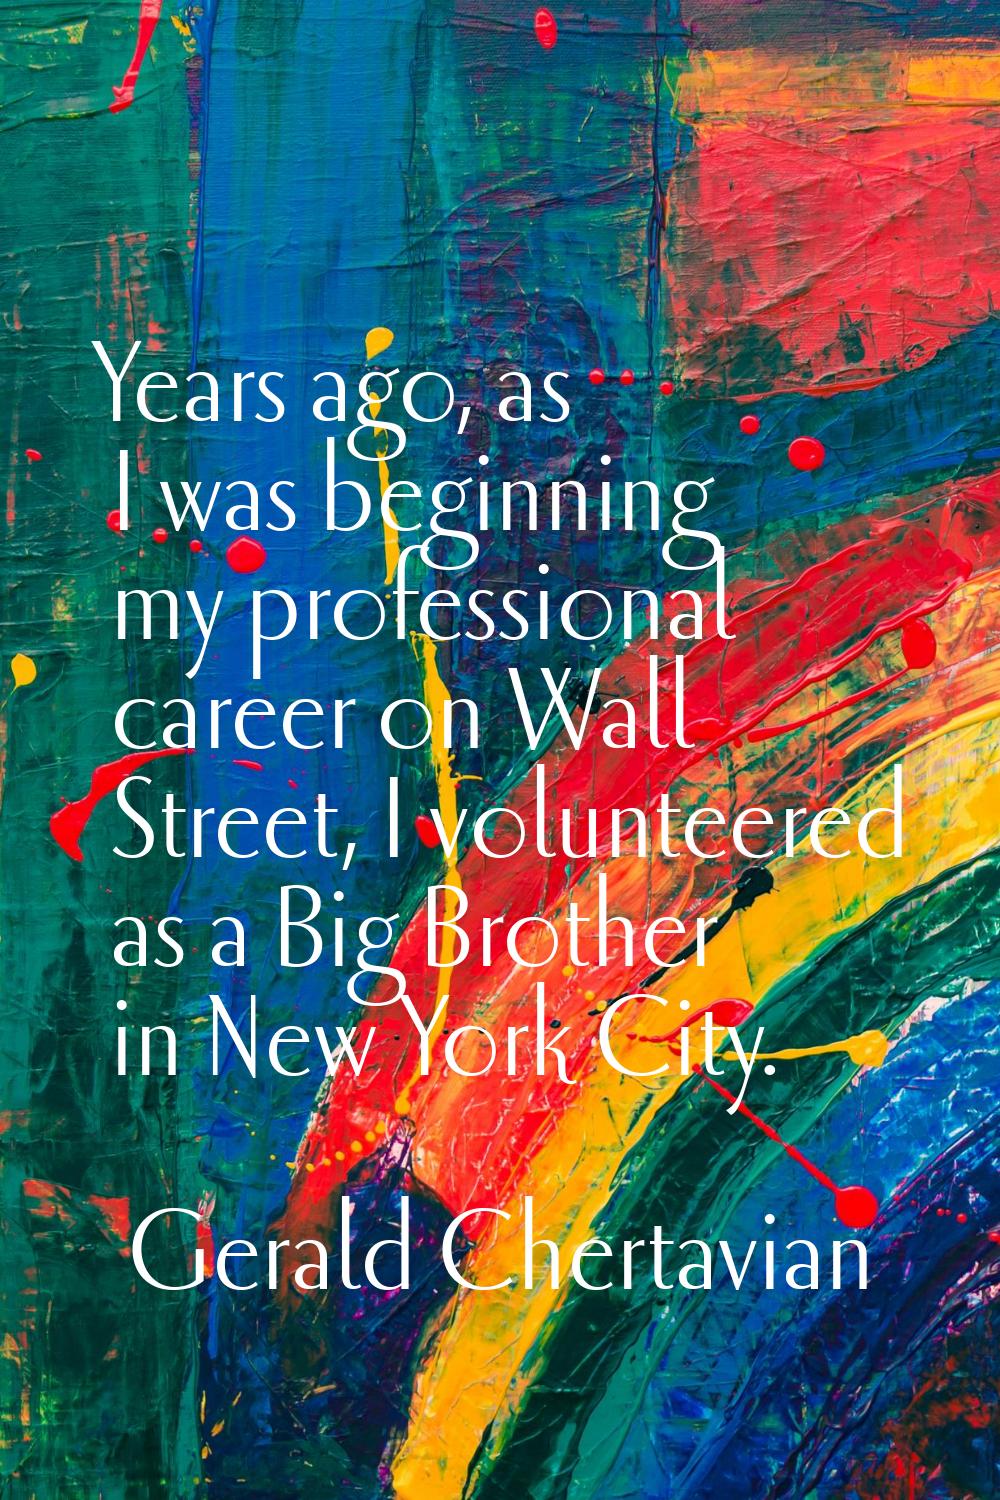 Years ago, as I was beginning my professional career on Wall Street, I volunteered as a Big Brother